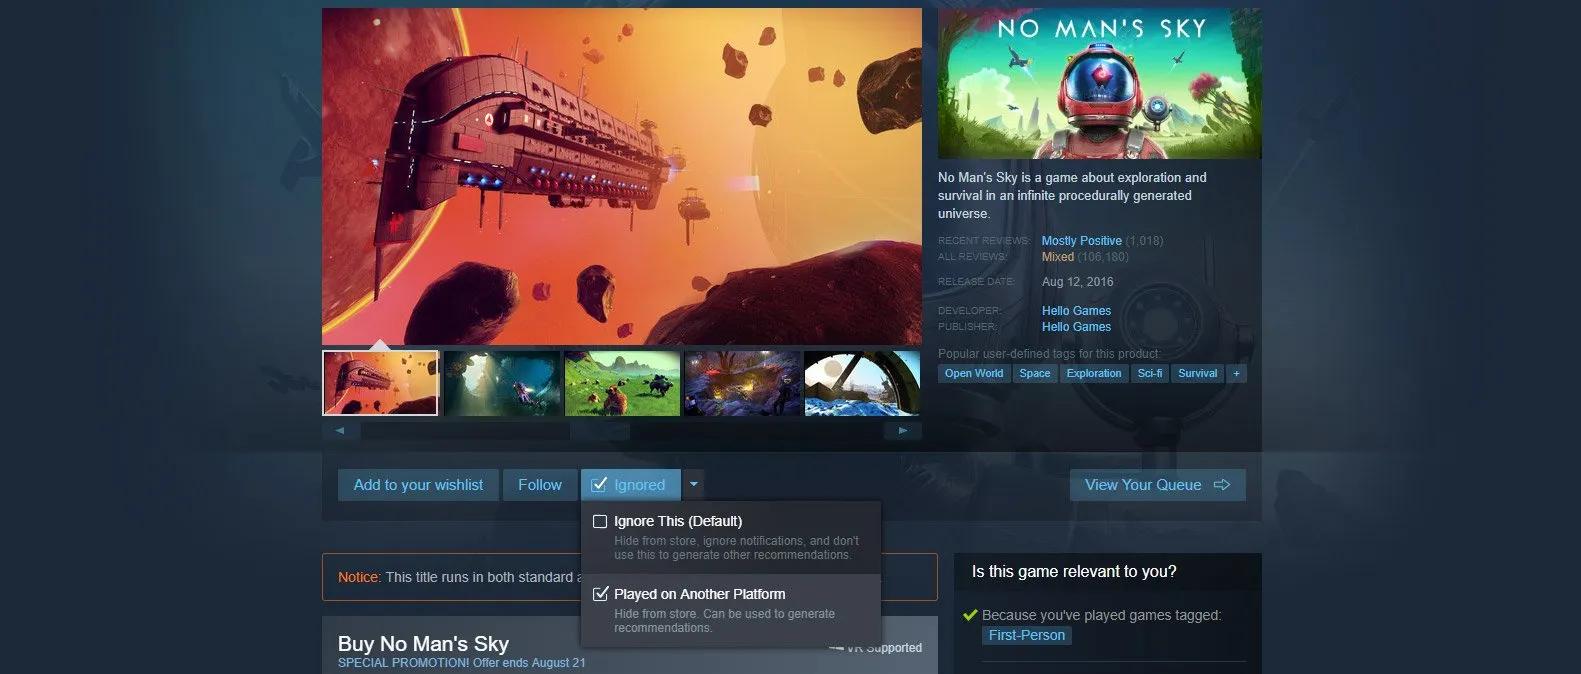 There's a way to hide games on the Steam store that you already